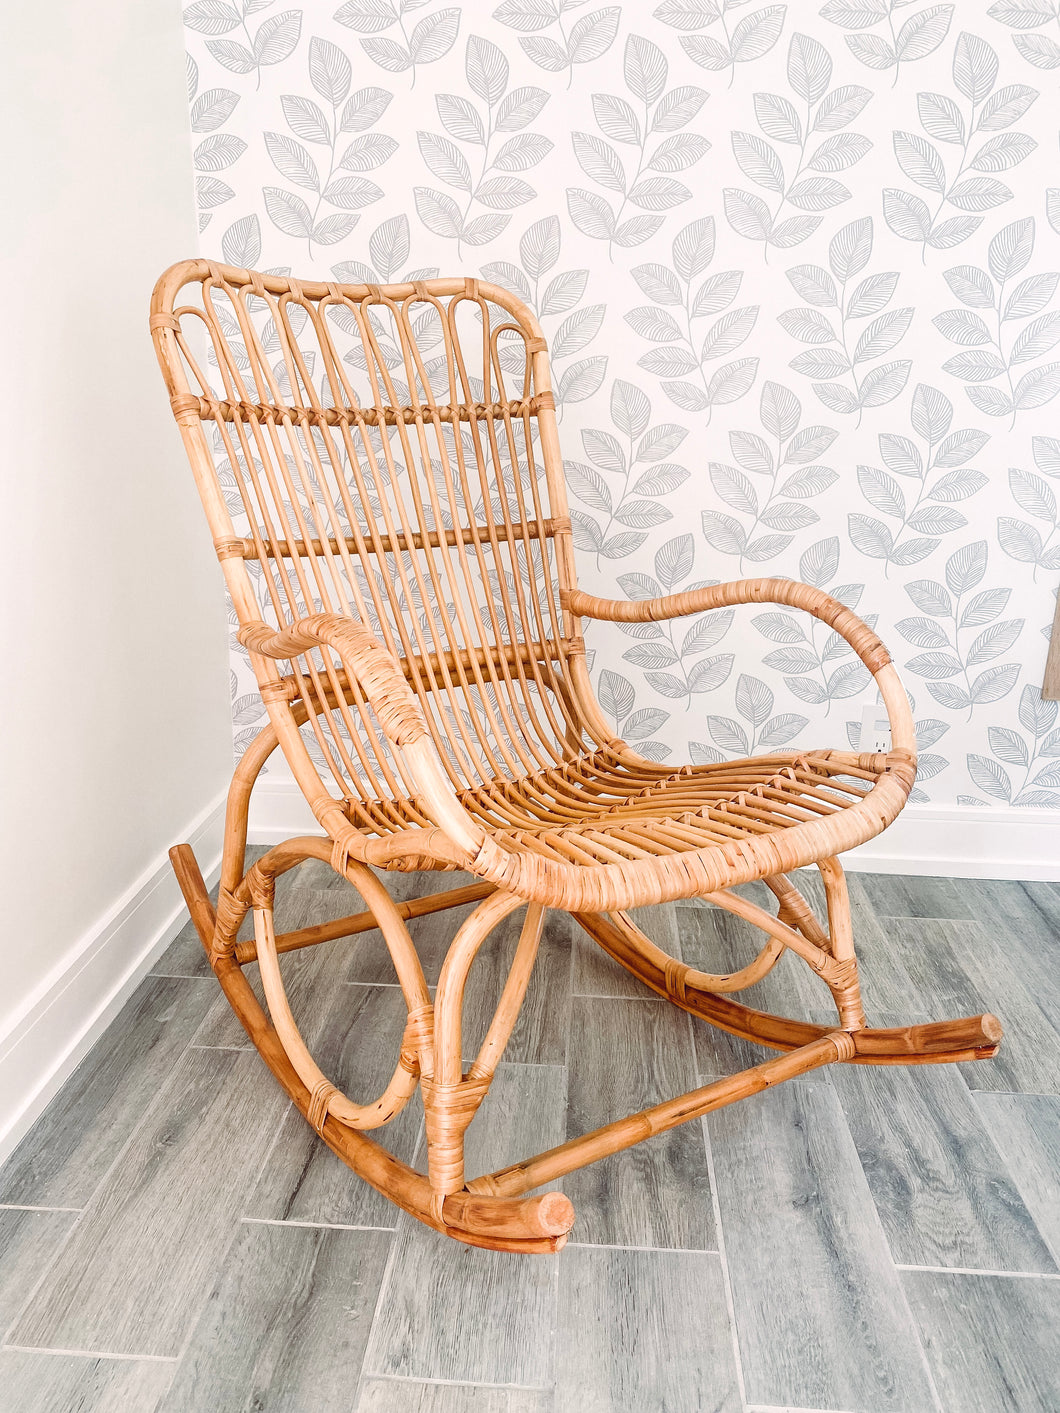 Rattan Rocking Chair, Indoor or Outdoor Wicker Chair, Rocking Chair